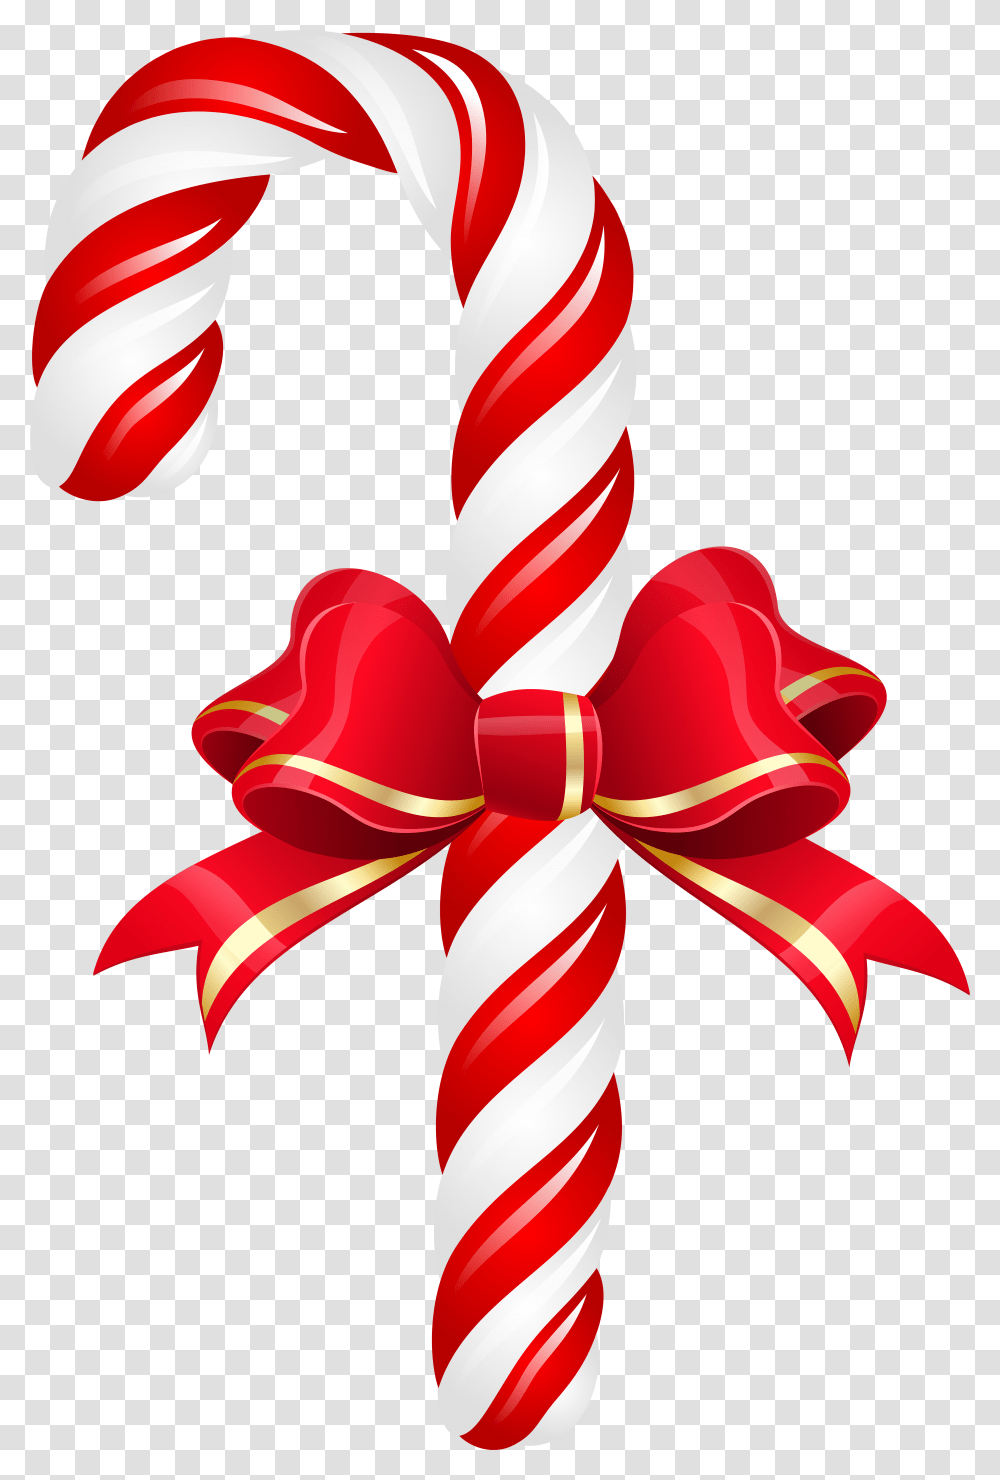 Clip Art Clip Art Image Gallery Candy Cane With Ribbon, Food, Sweets, Confectionery Transparent Png